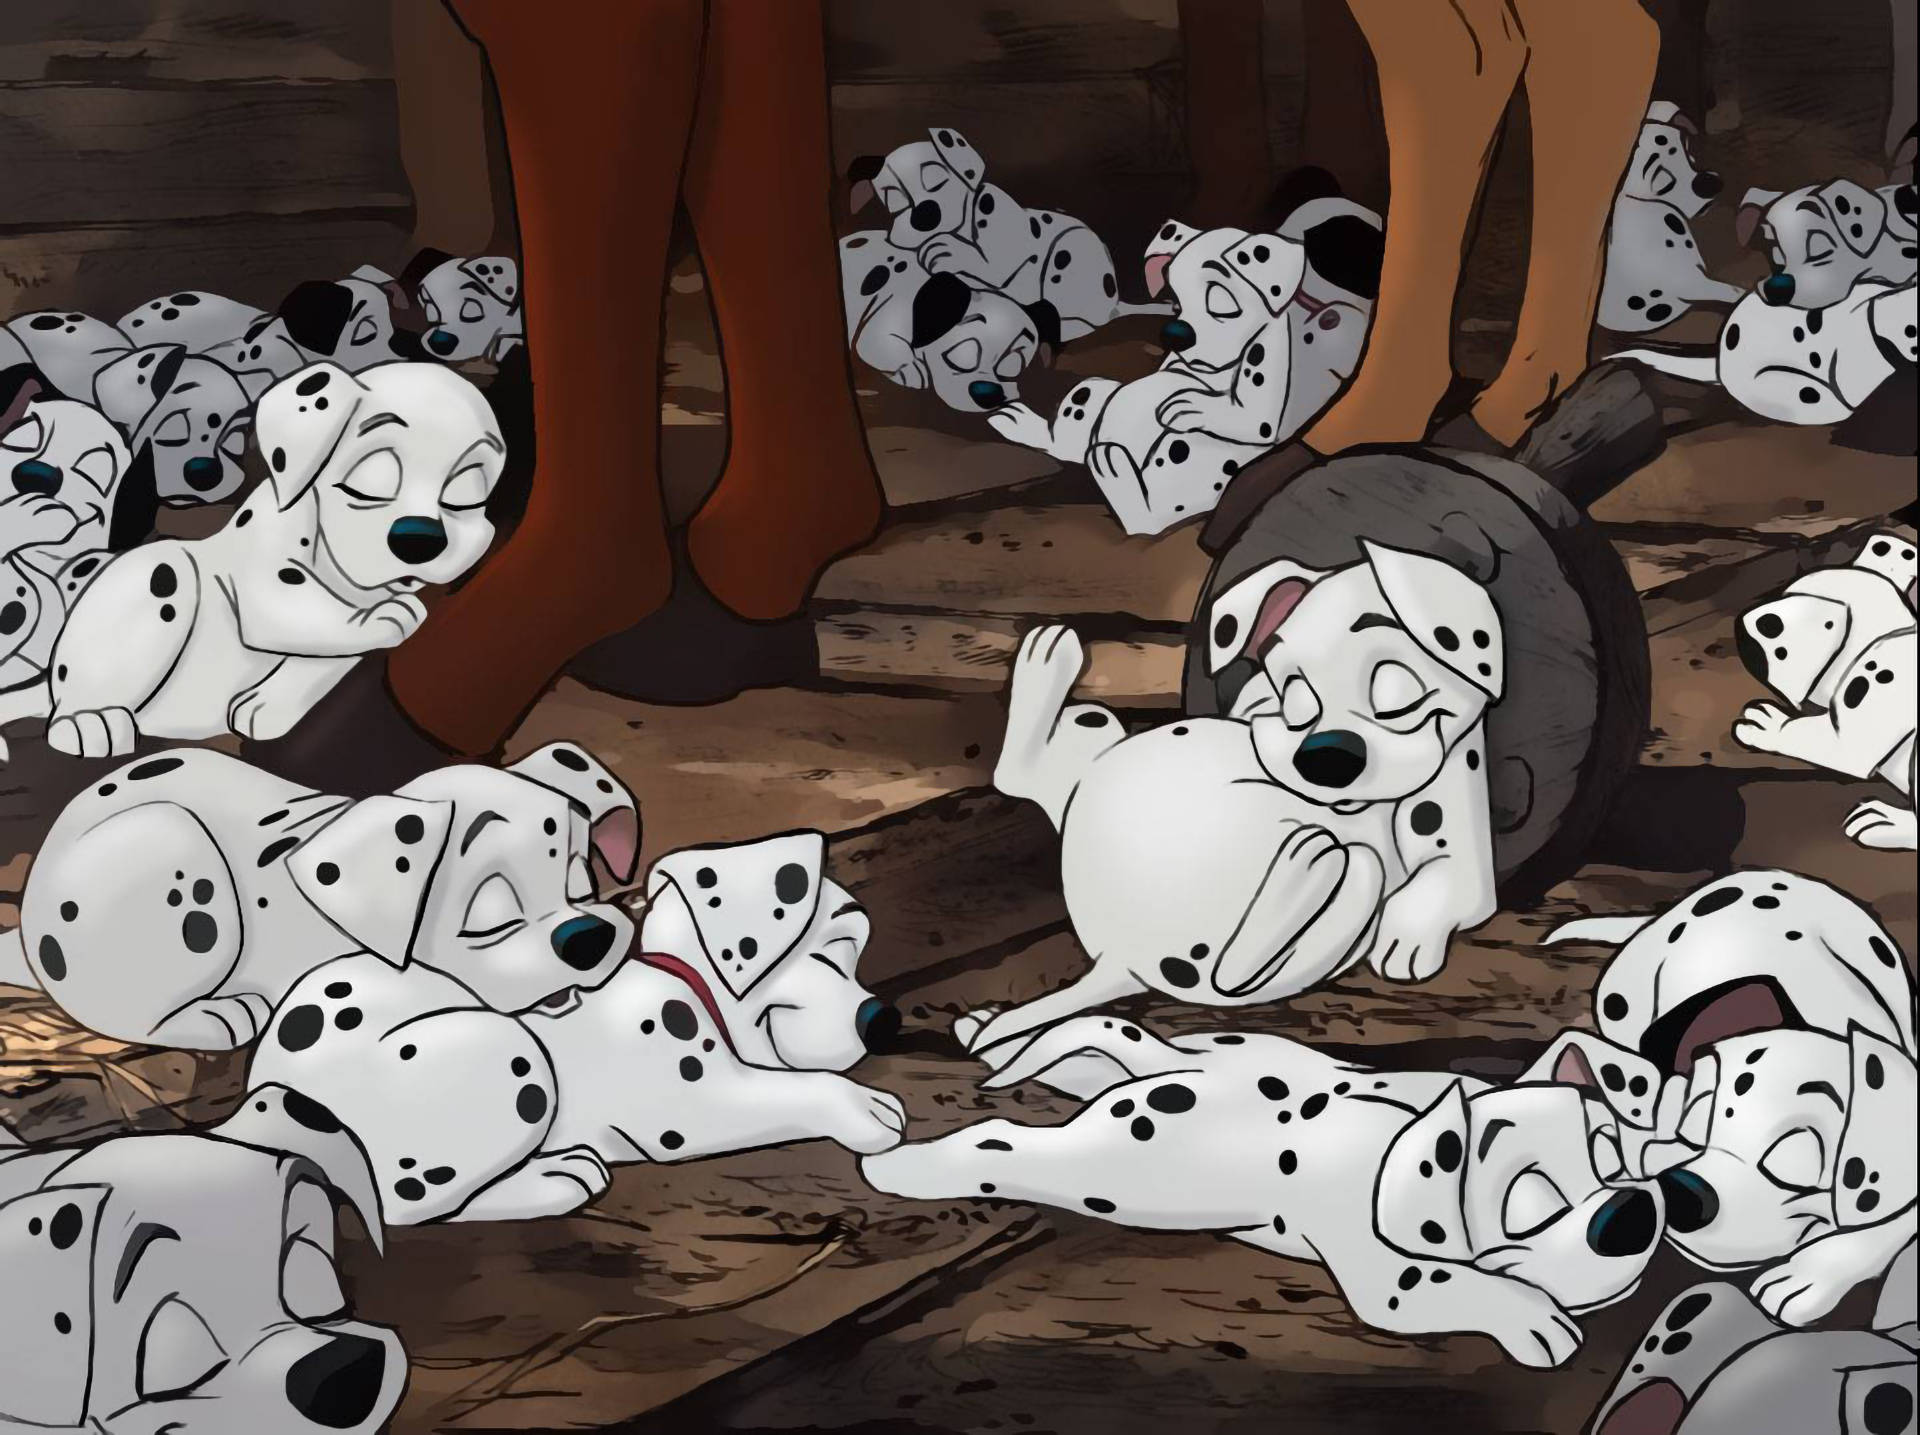 101 Dalmatians Napping On Stable